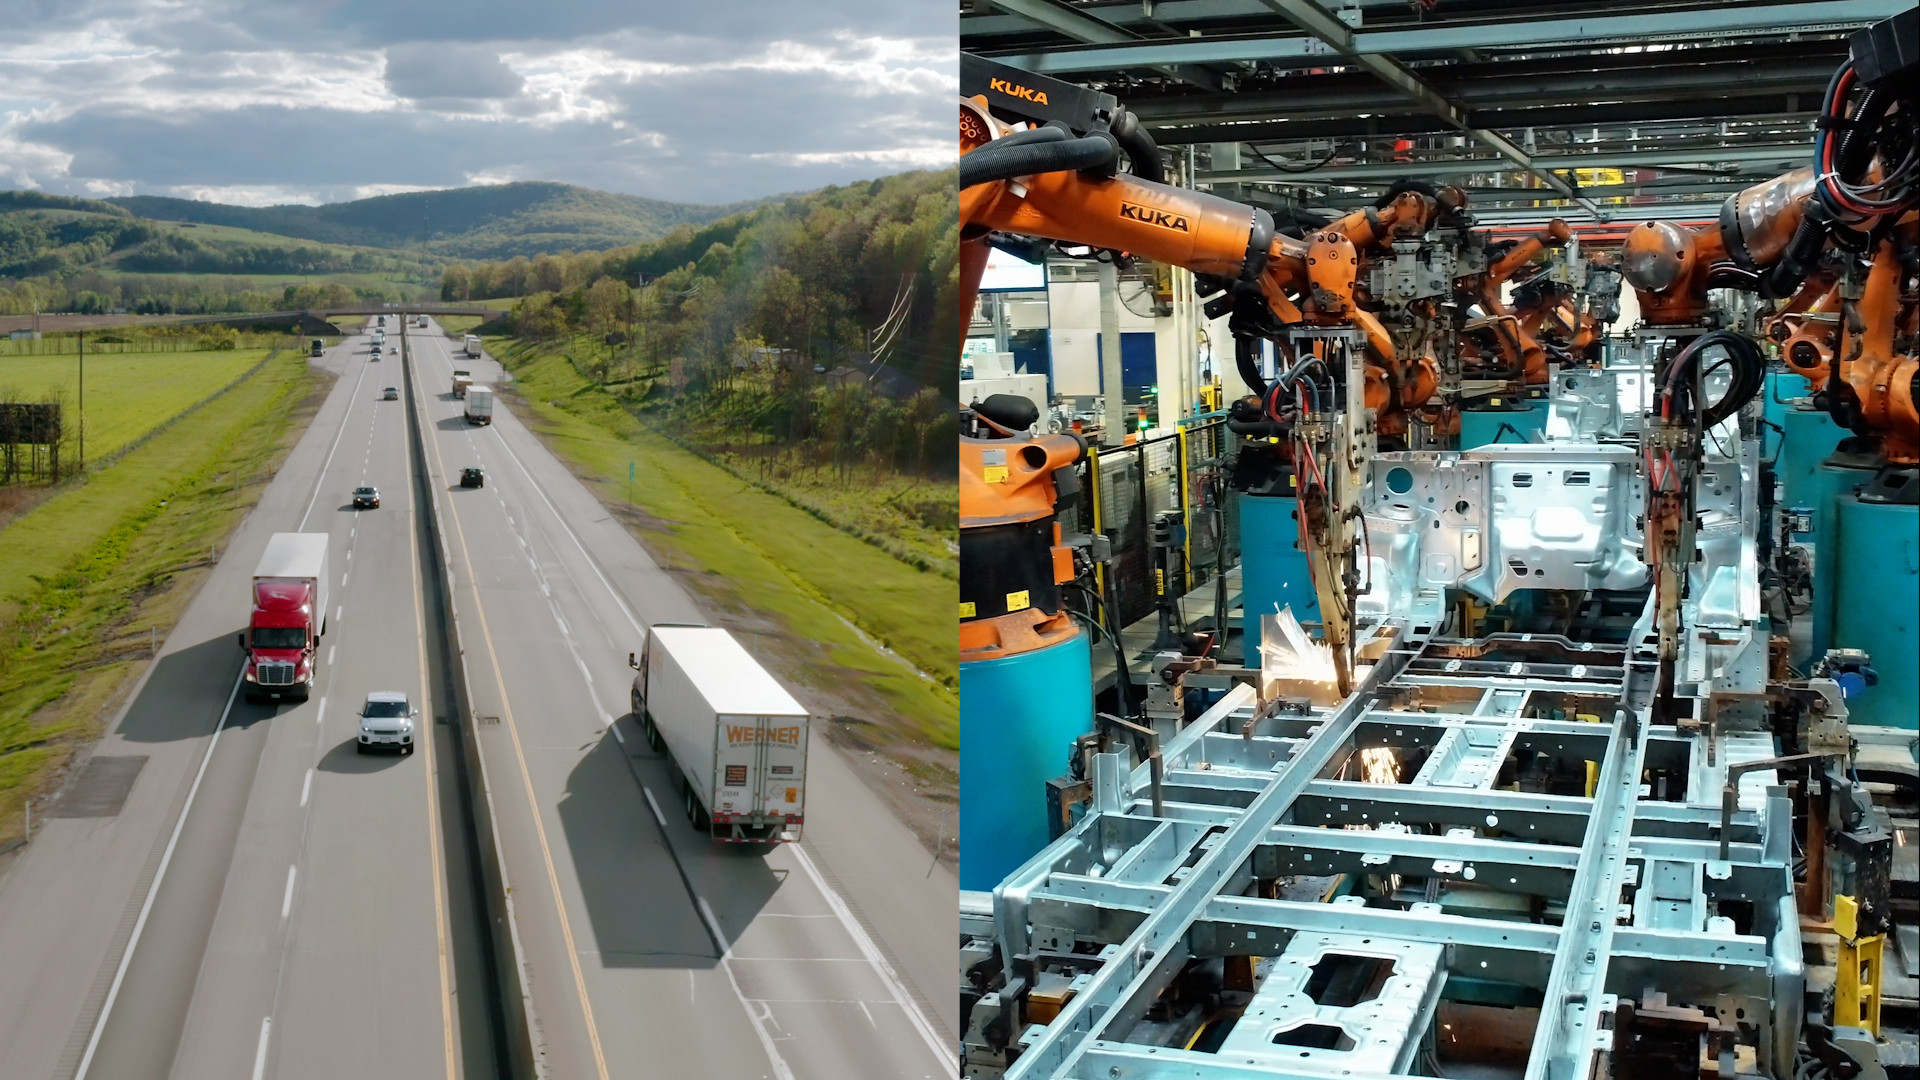 The image on the left is an overhead view of a freeway. The image on the right is machinery in a factory. 